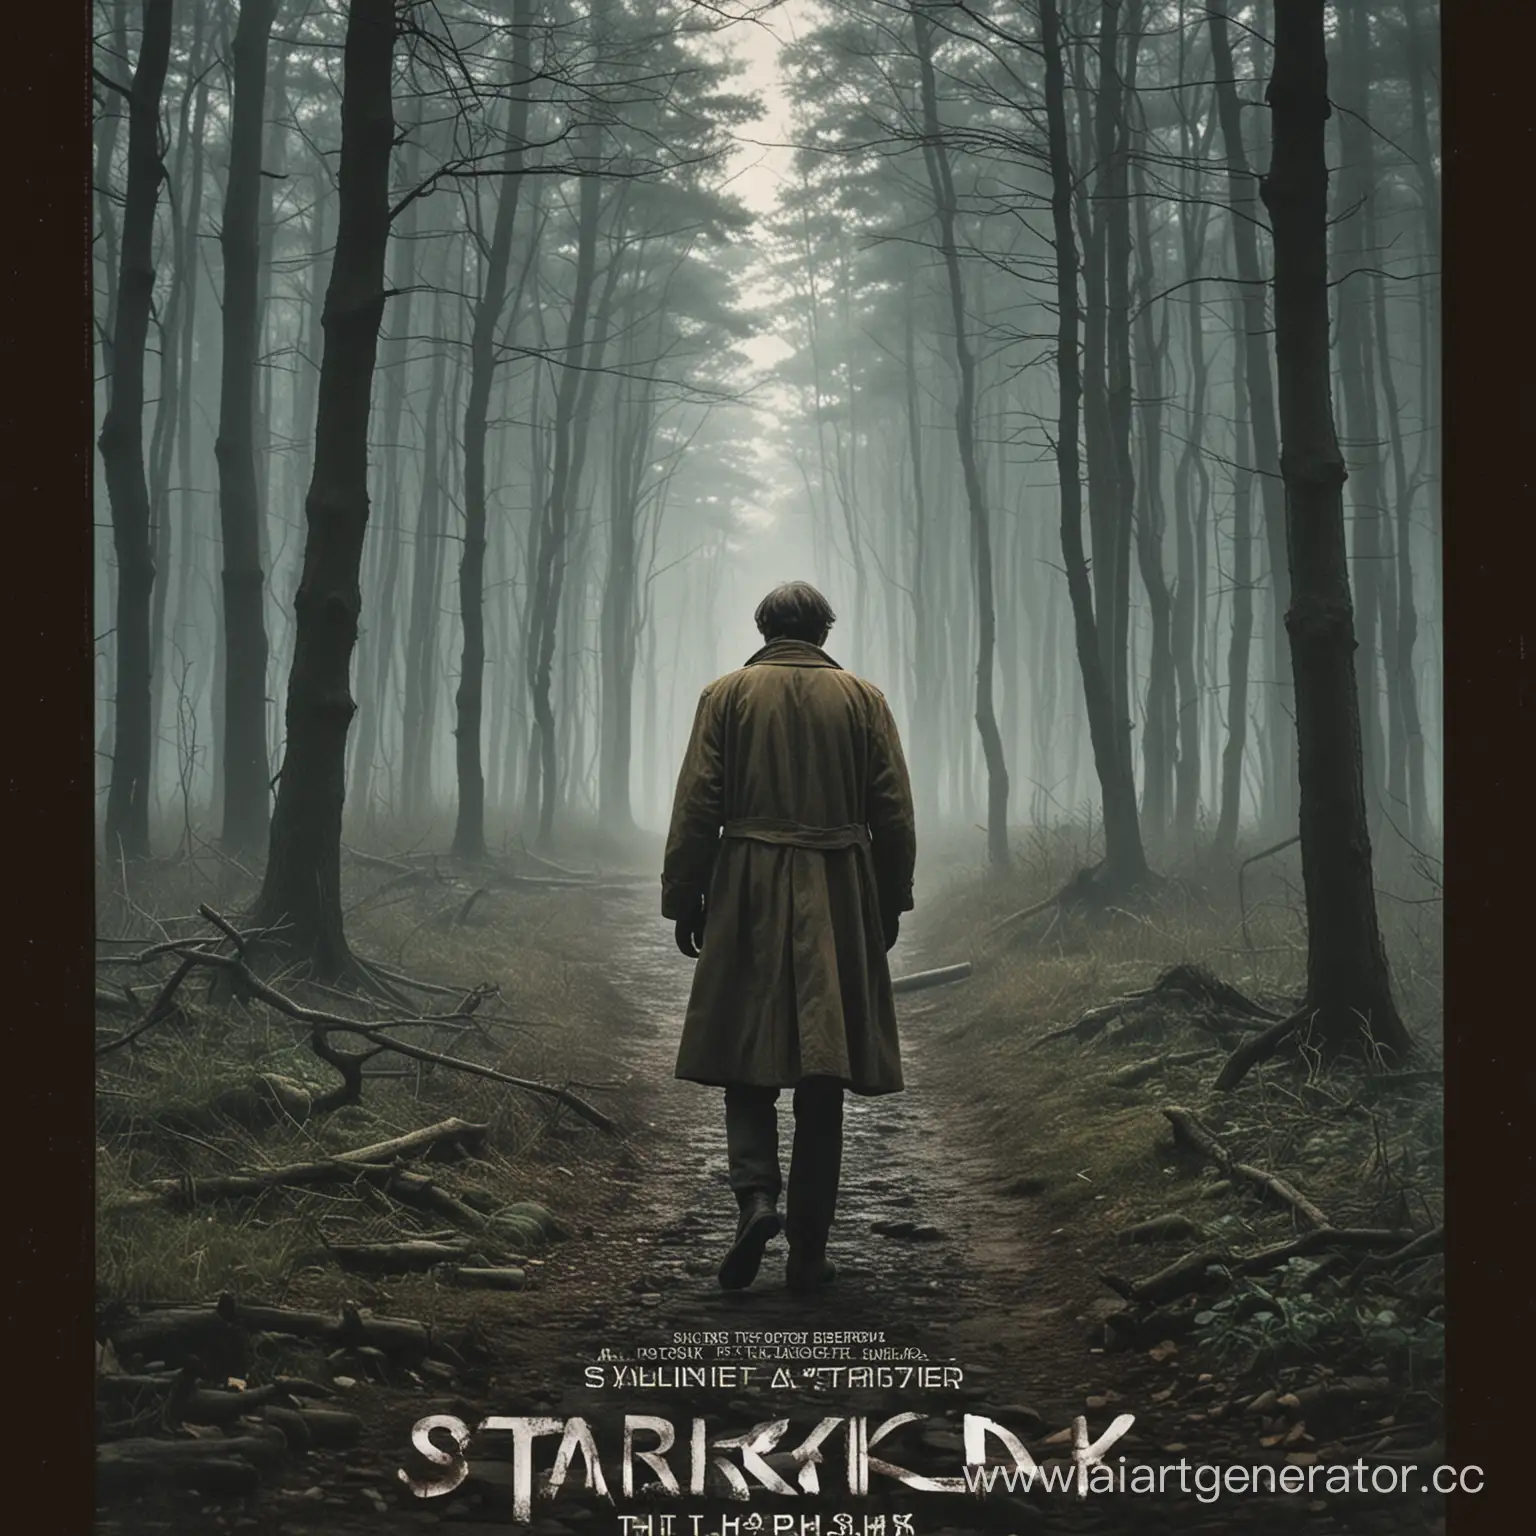 Mysterious-Poster-for-Tarkovskys-Stalker-Featuring-Enigmatic-Main-Character